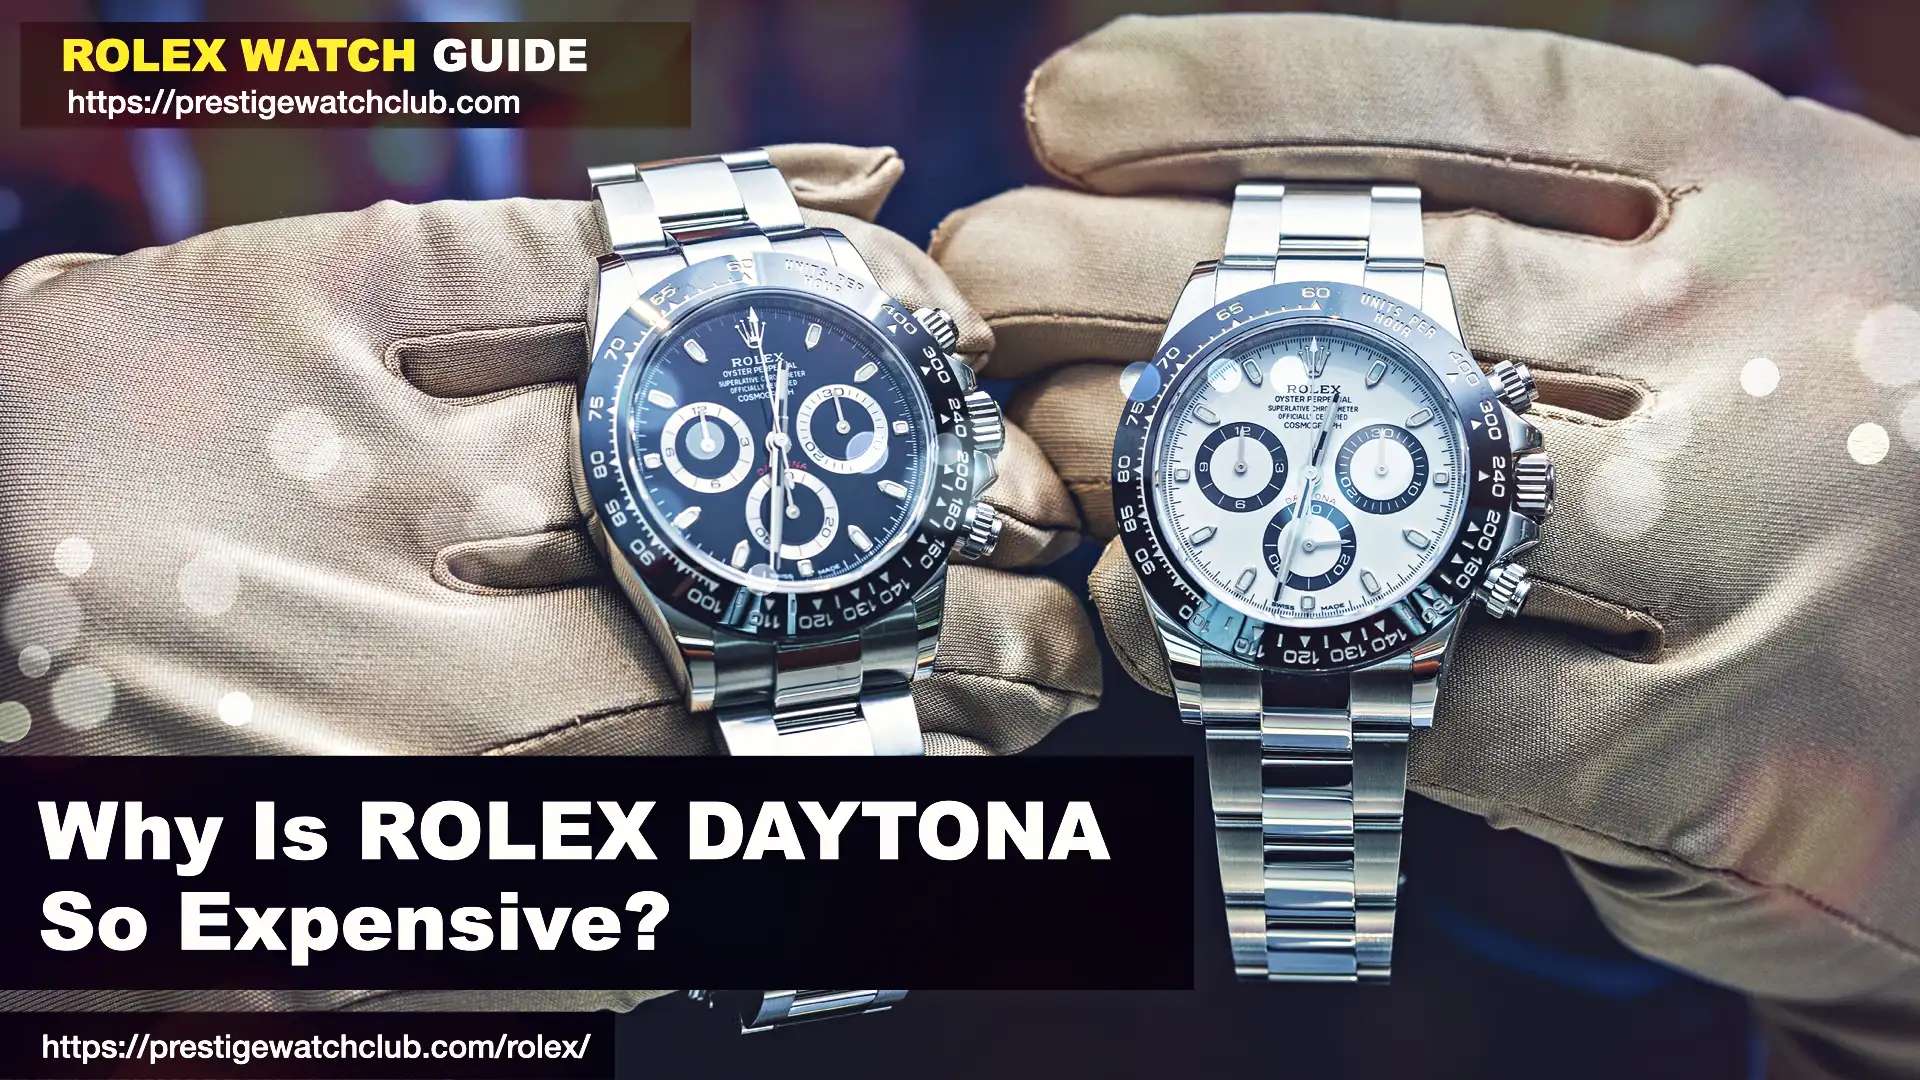 Why Is Rolex Daytona So Expensive?